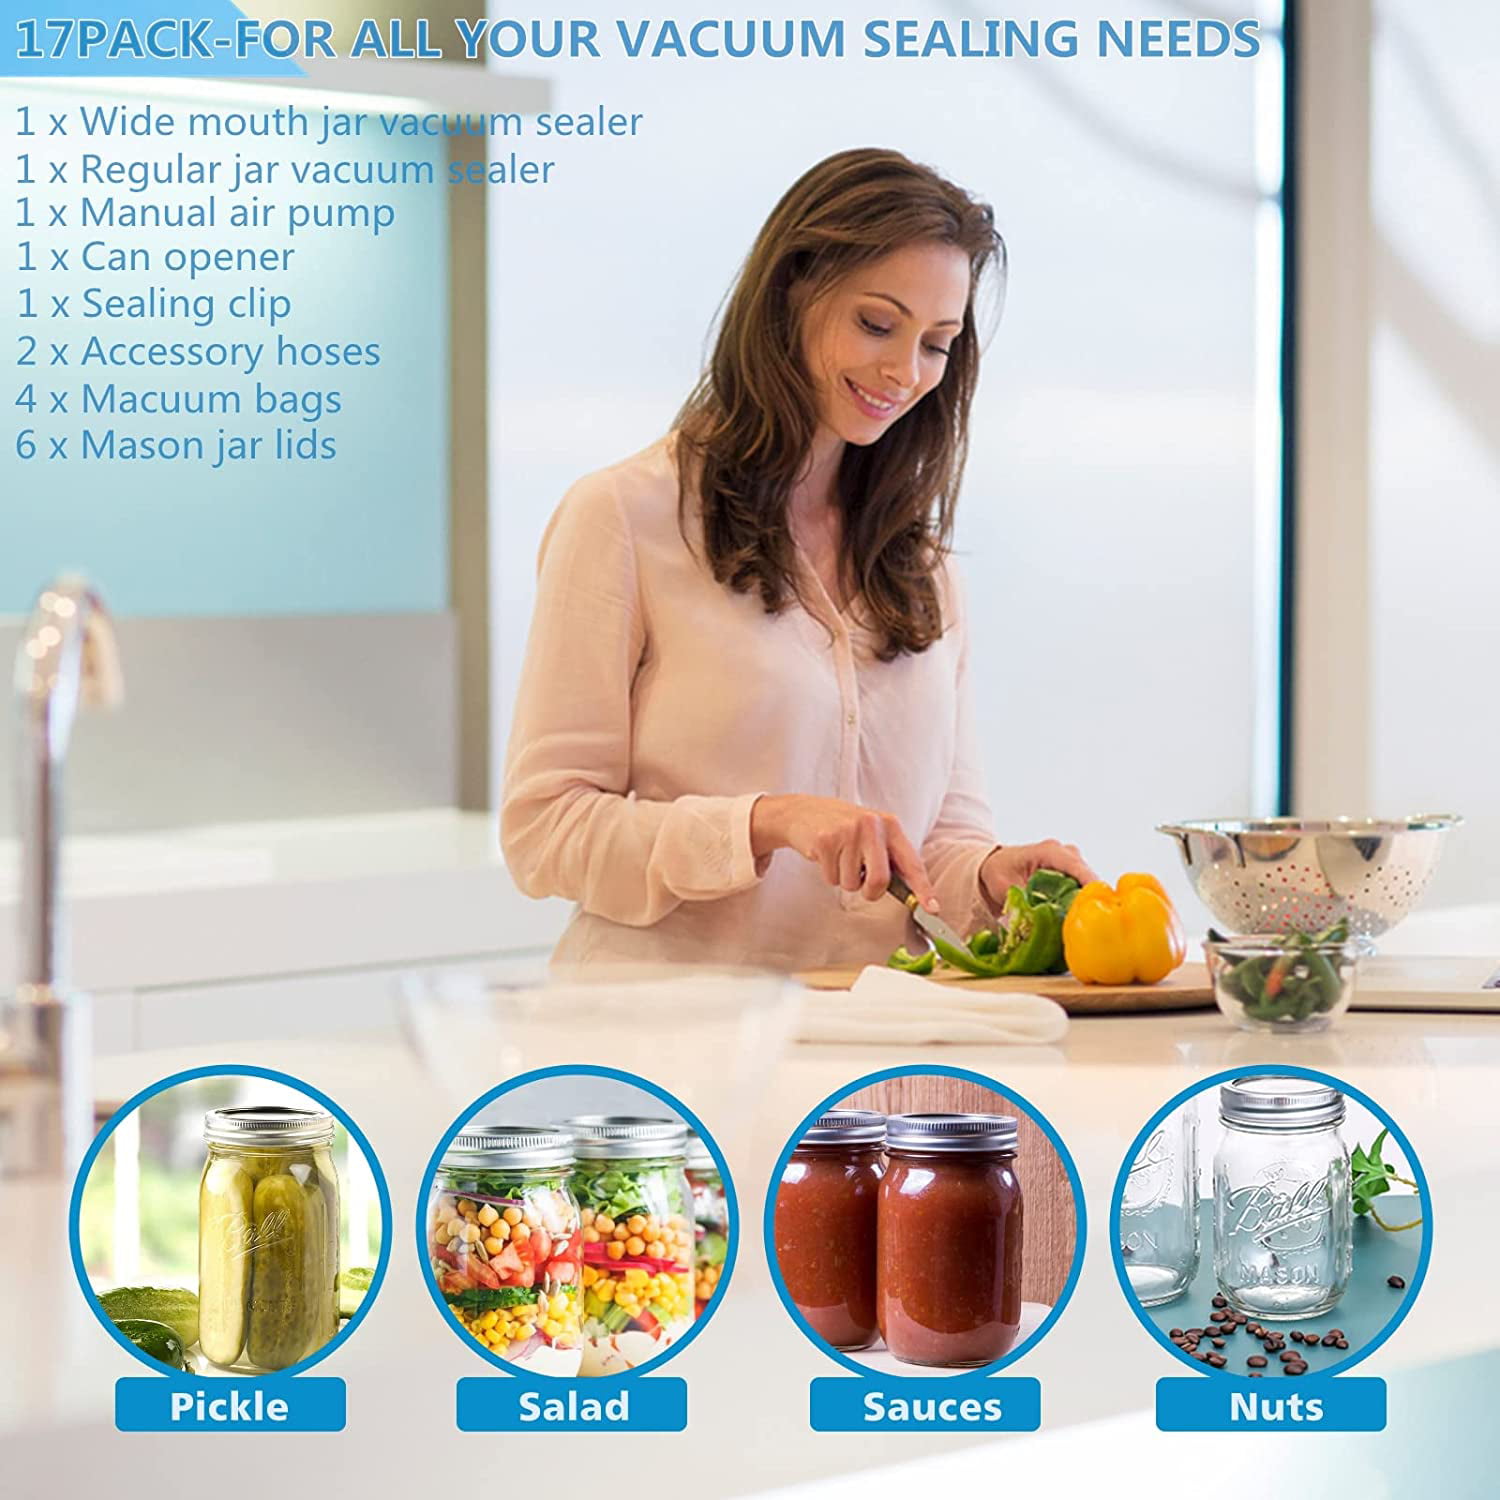 Vacuum Sealers What You Need to Know - the Imperfectly Happy home